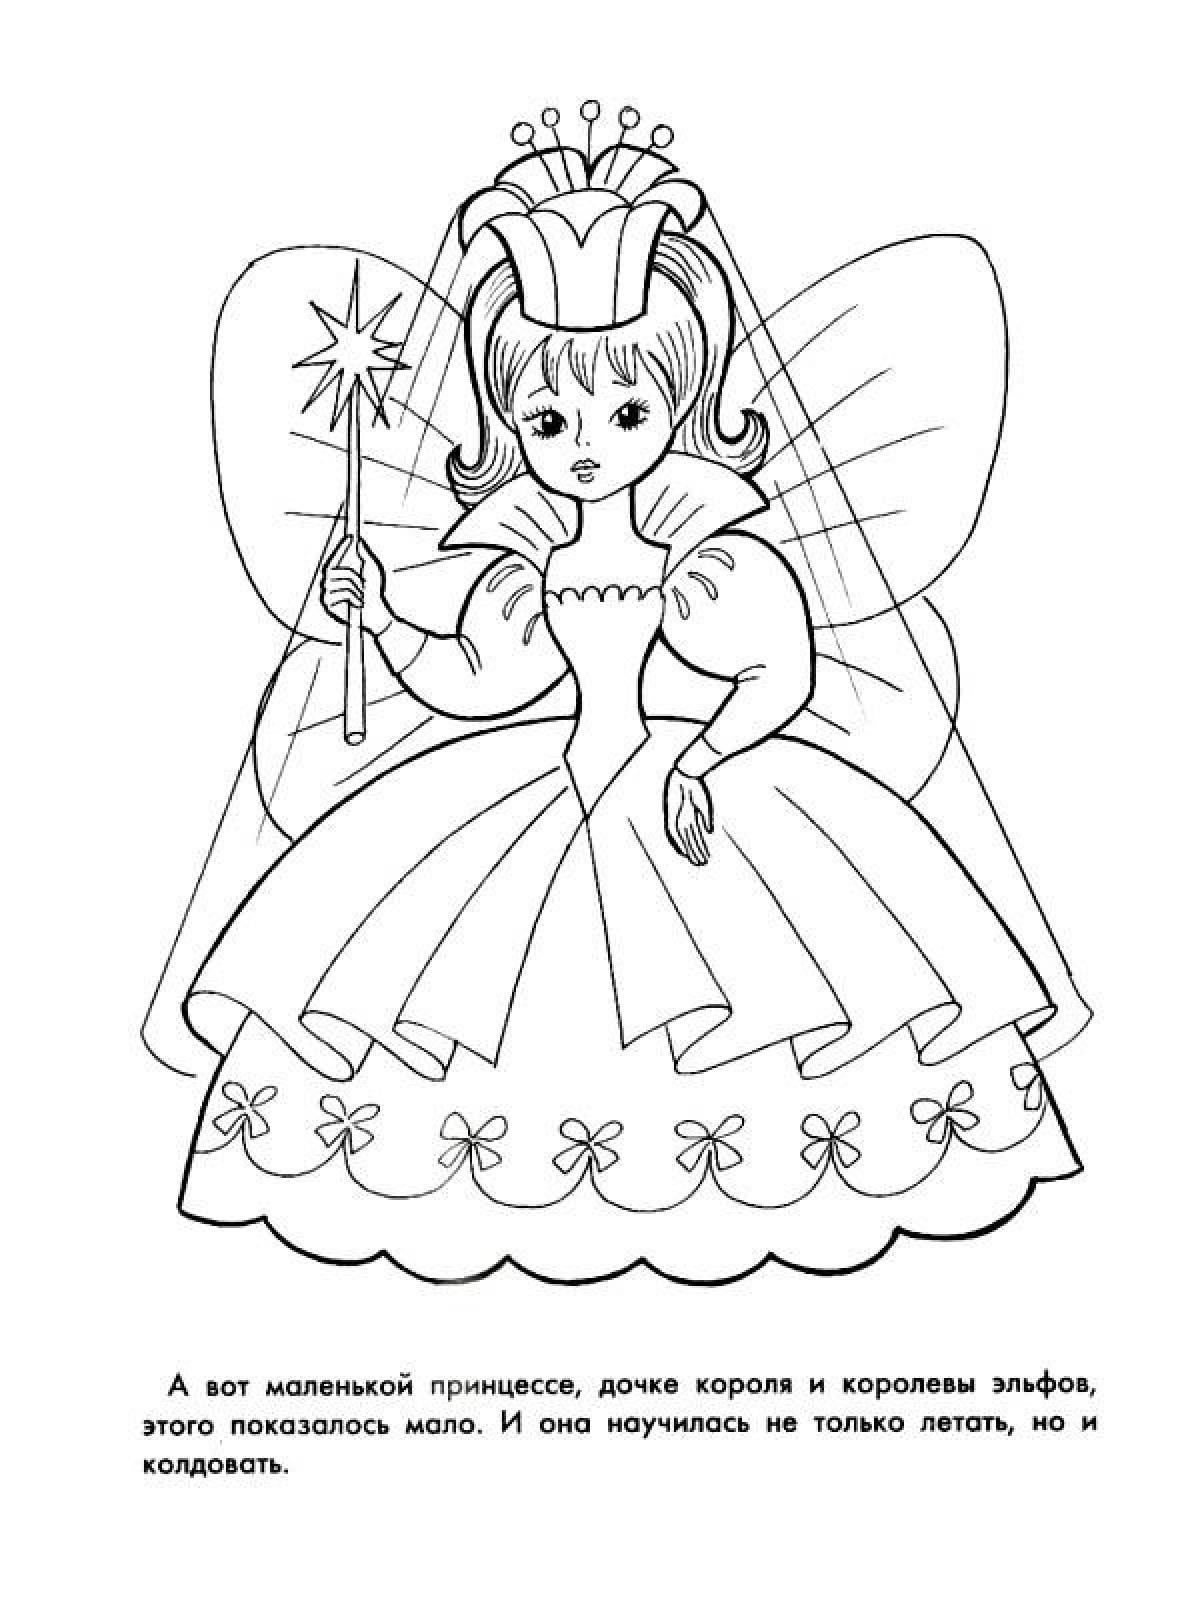 Inspirational princess coloring book for 3-4 year olds